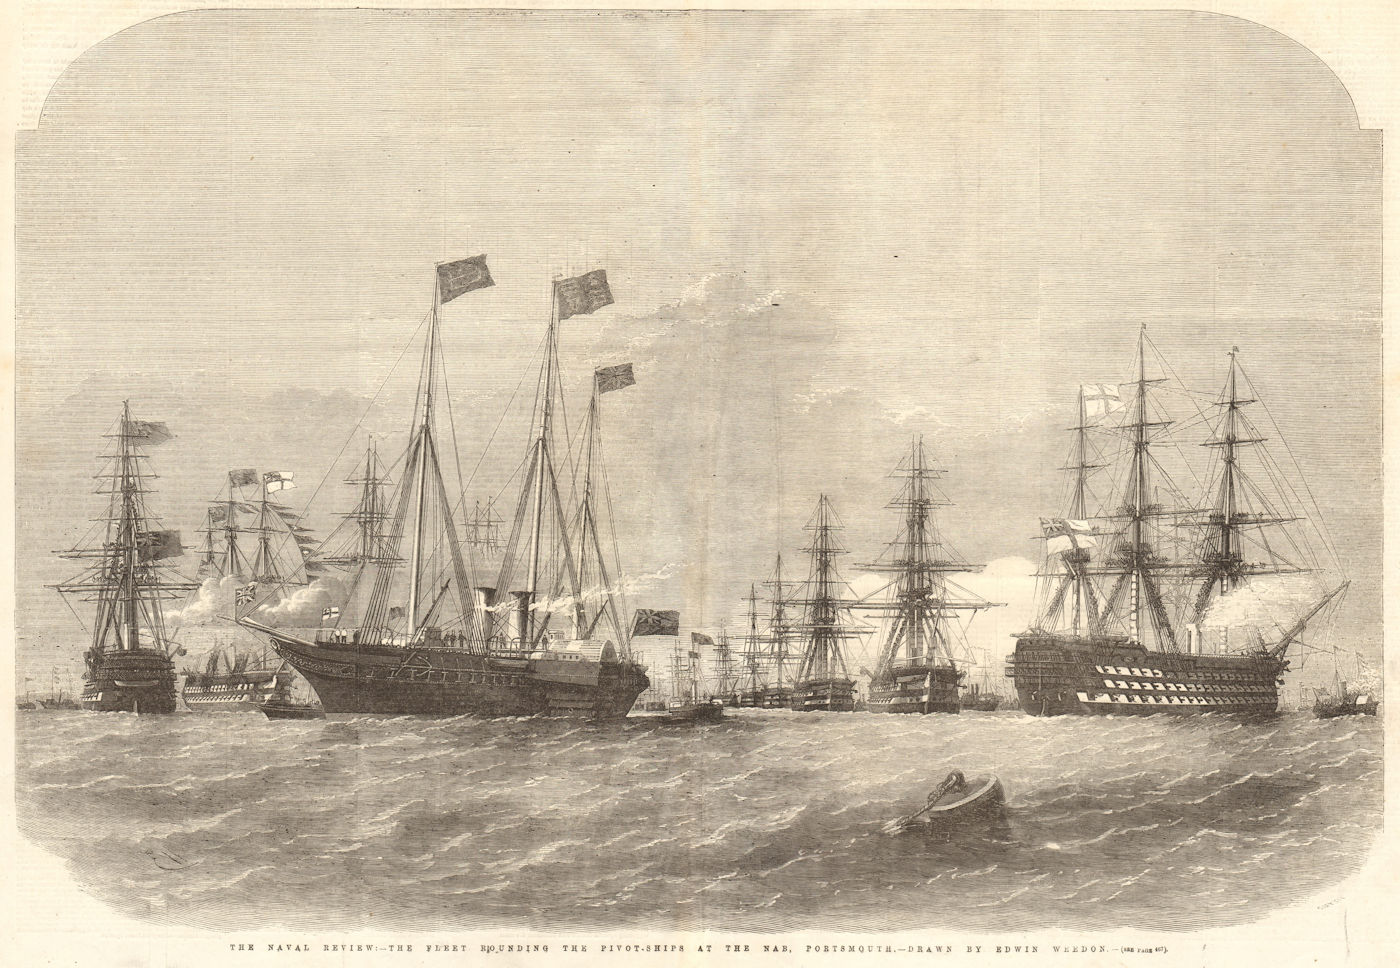 The Naval Review: the fleet rounding the pivot-ships at the Nab, Portsmouth 1856